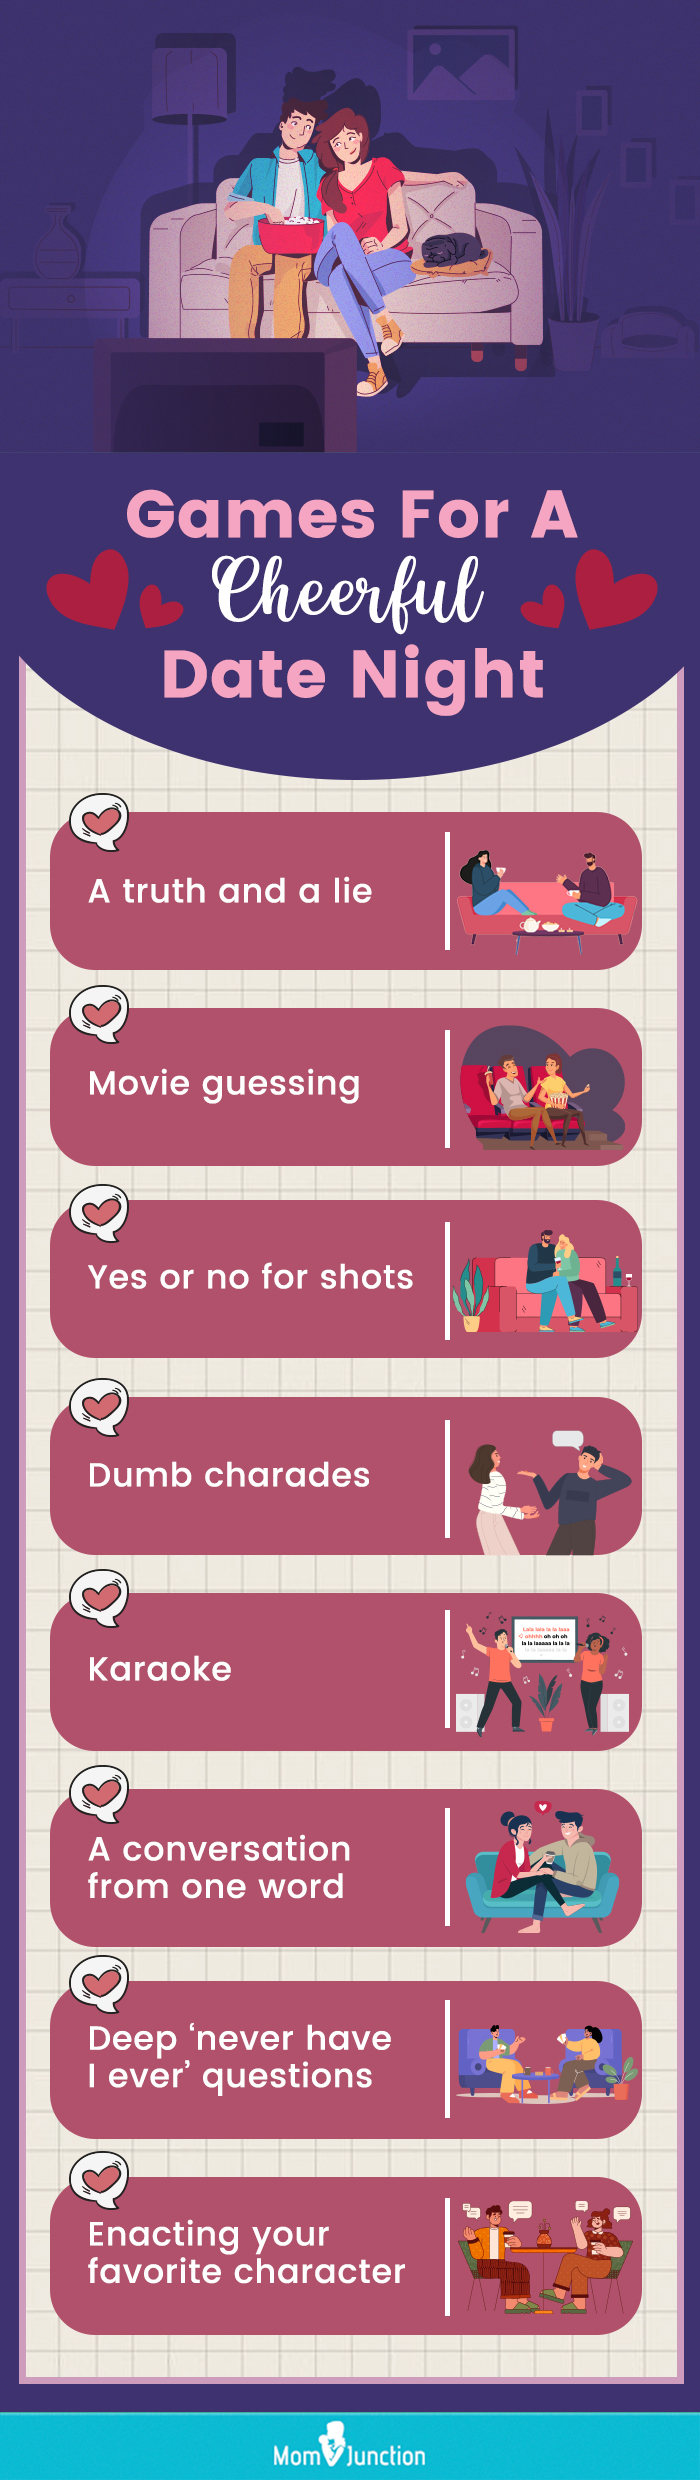 date night games for couples (infographic)